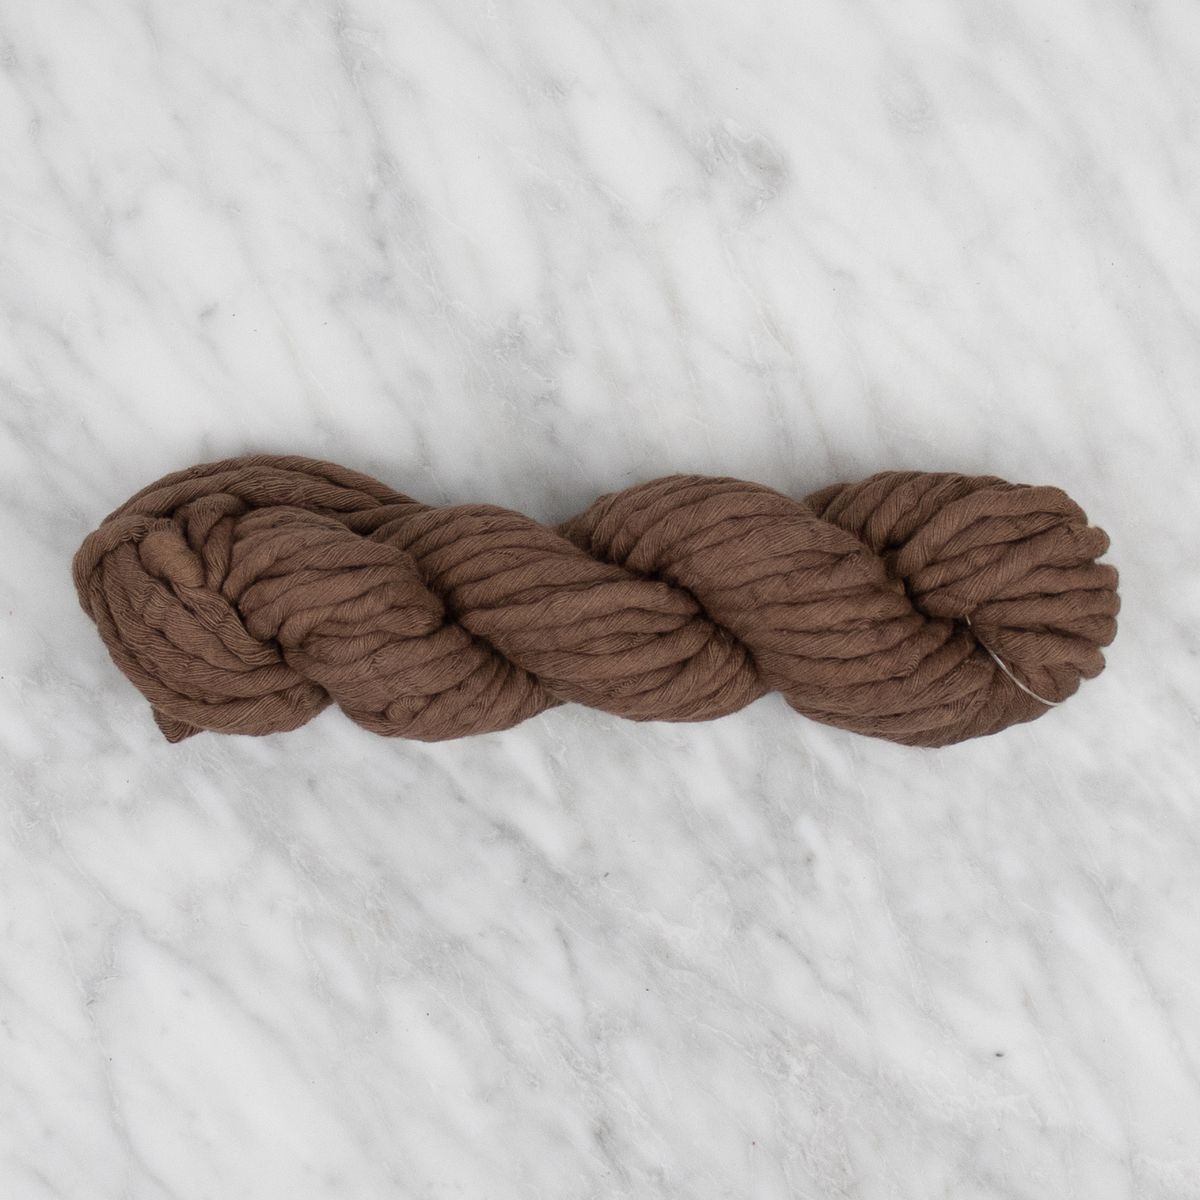 5mm Hand-Dyed Cotton String - Chocolate- 100 grams